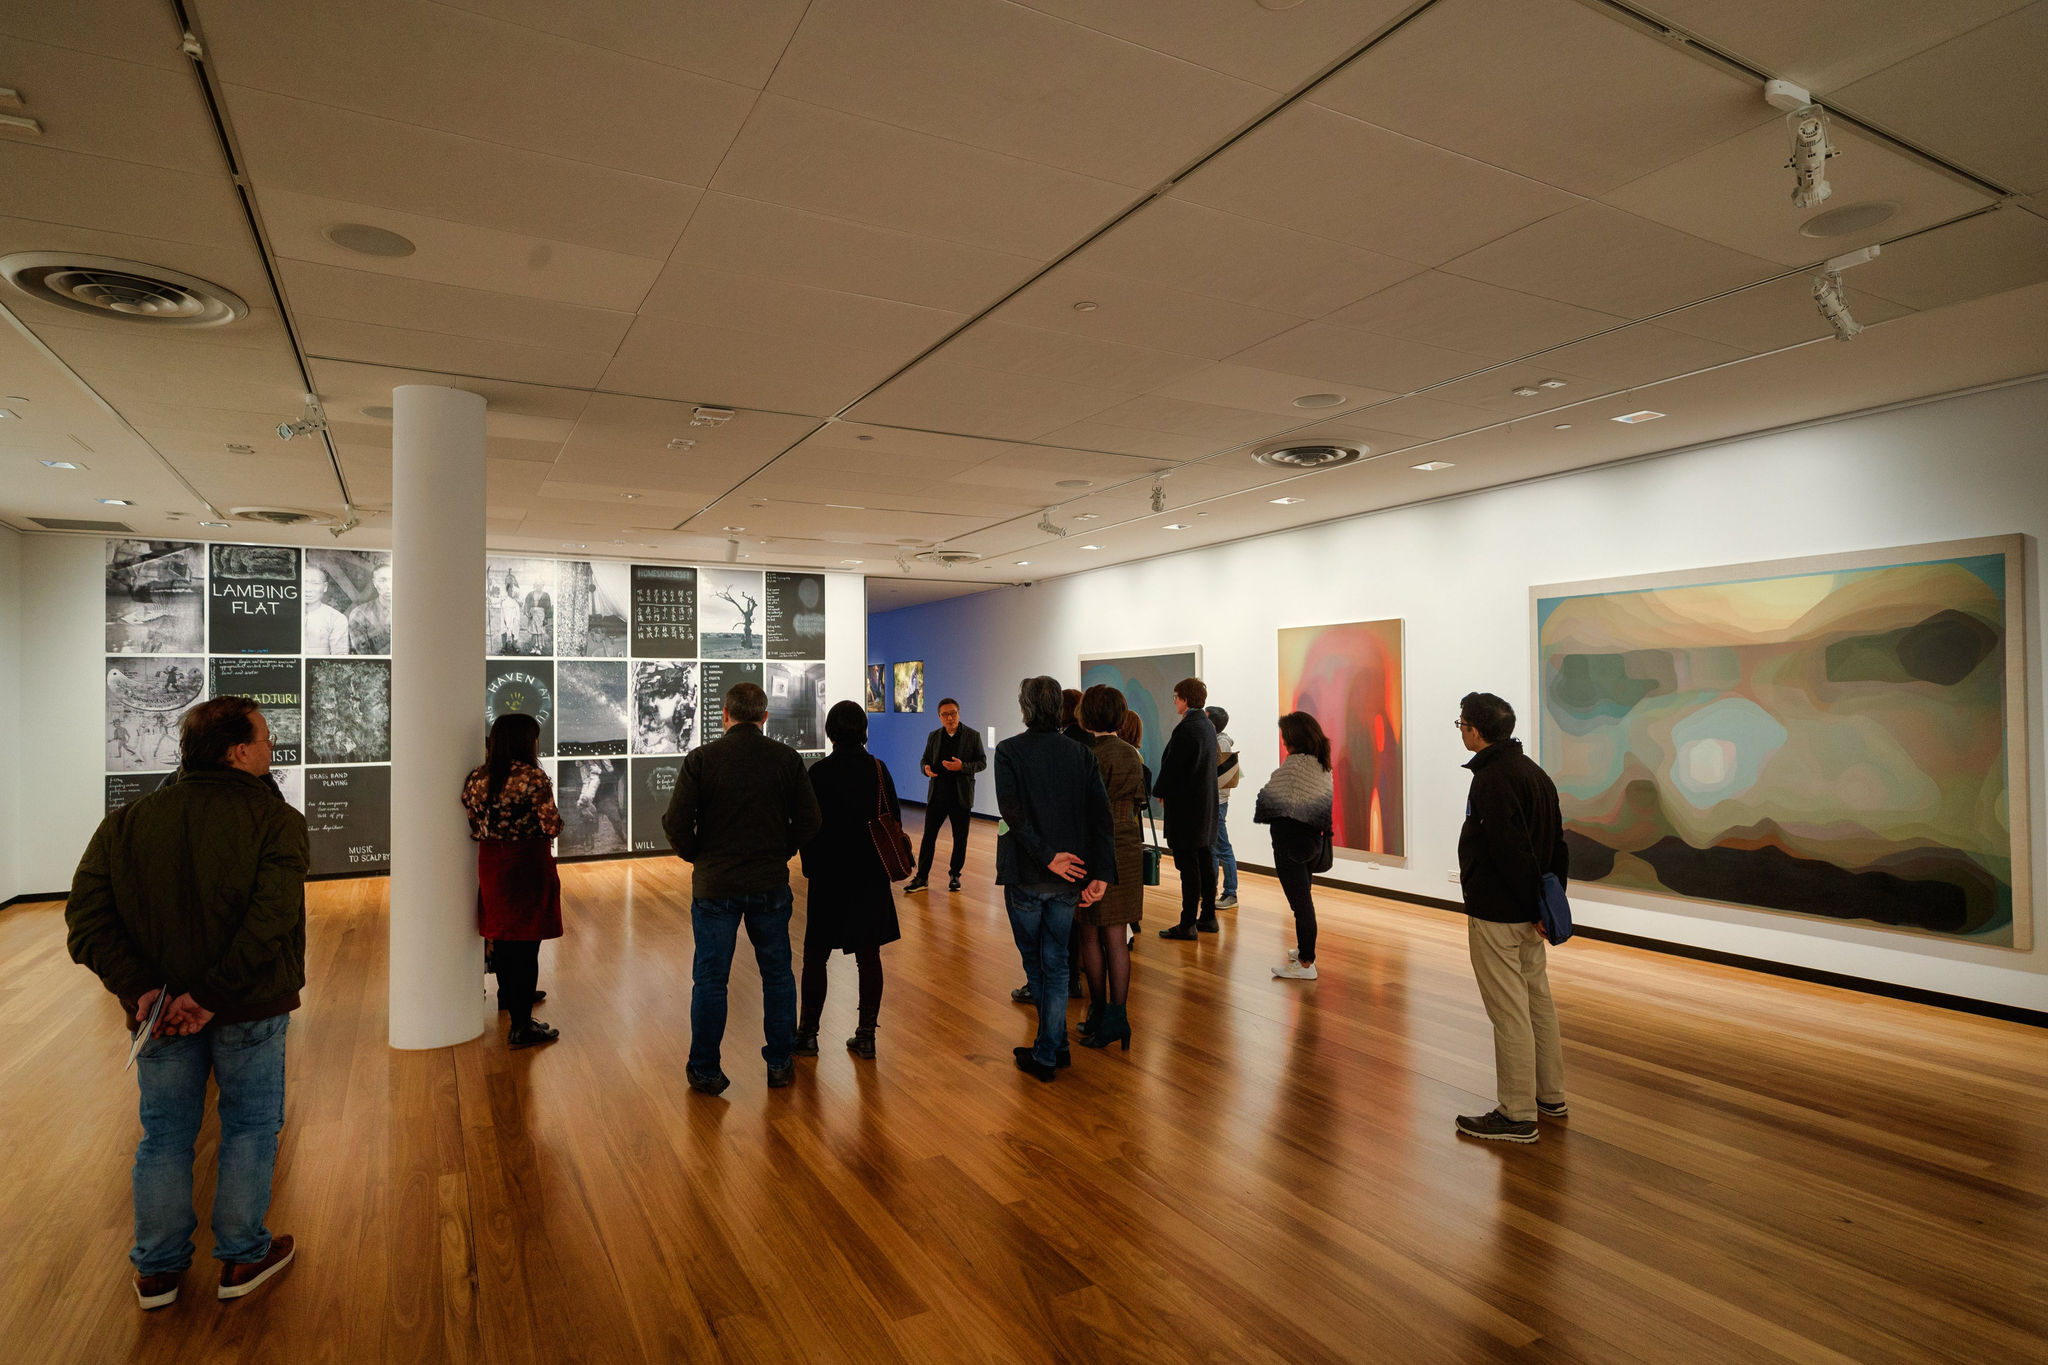 Exhibition opening at Town Hall Gallery for 'The Lives of Celestials' by John Young, displayed 31 August - 20 October 2019. Photograph by ImagePlay